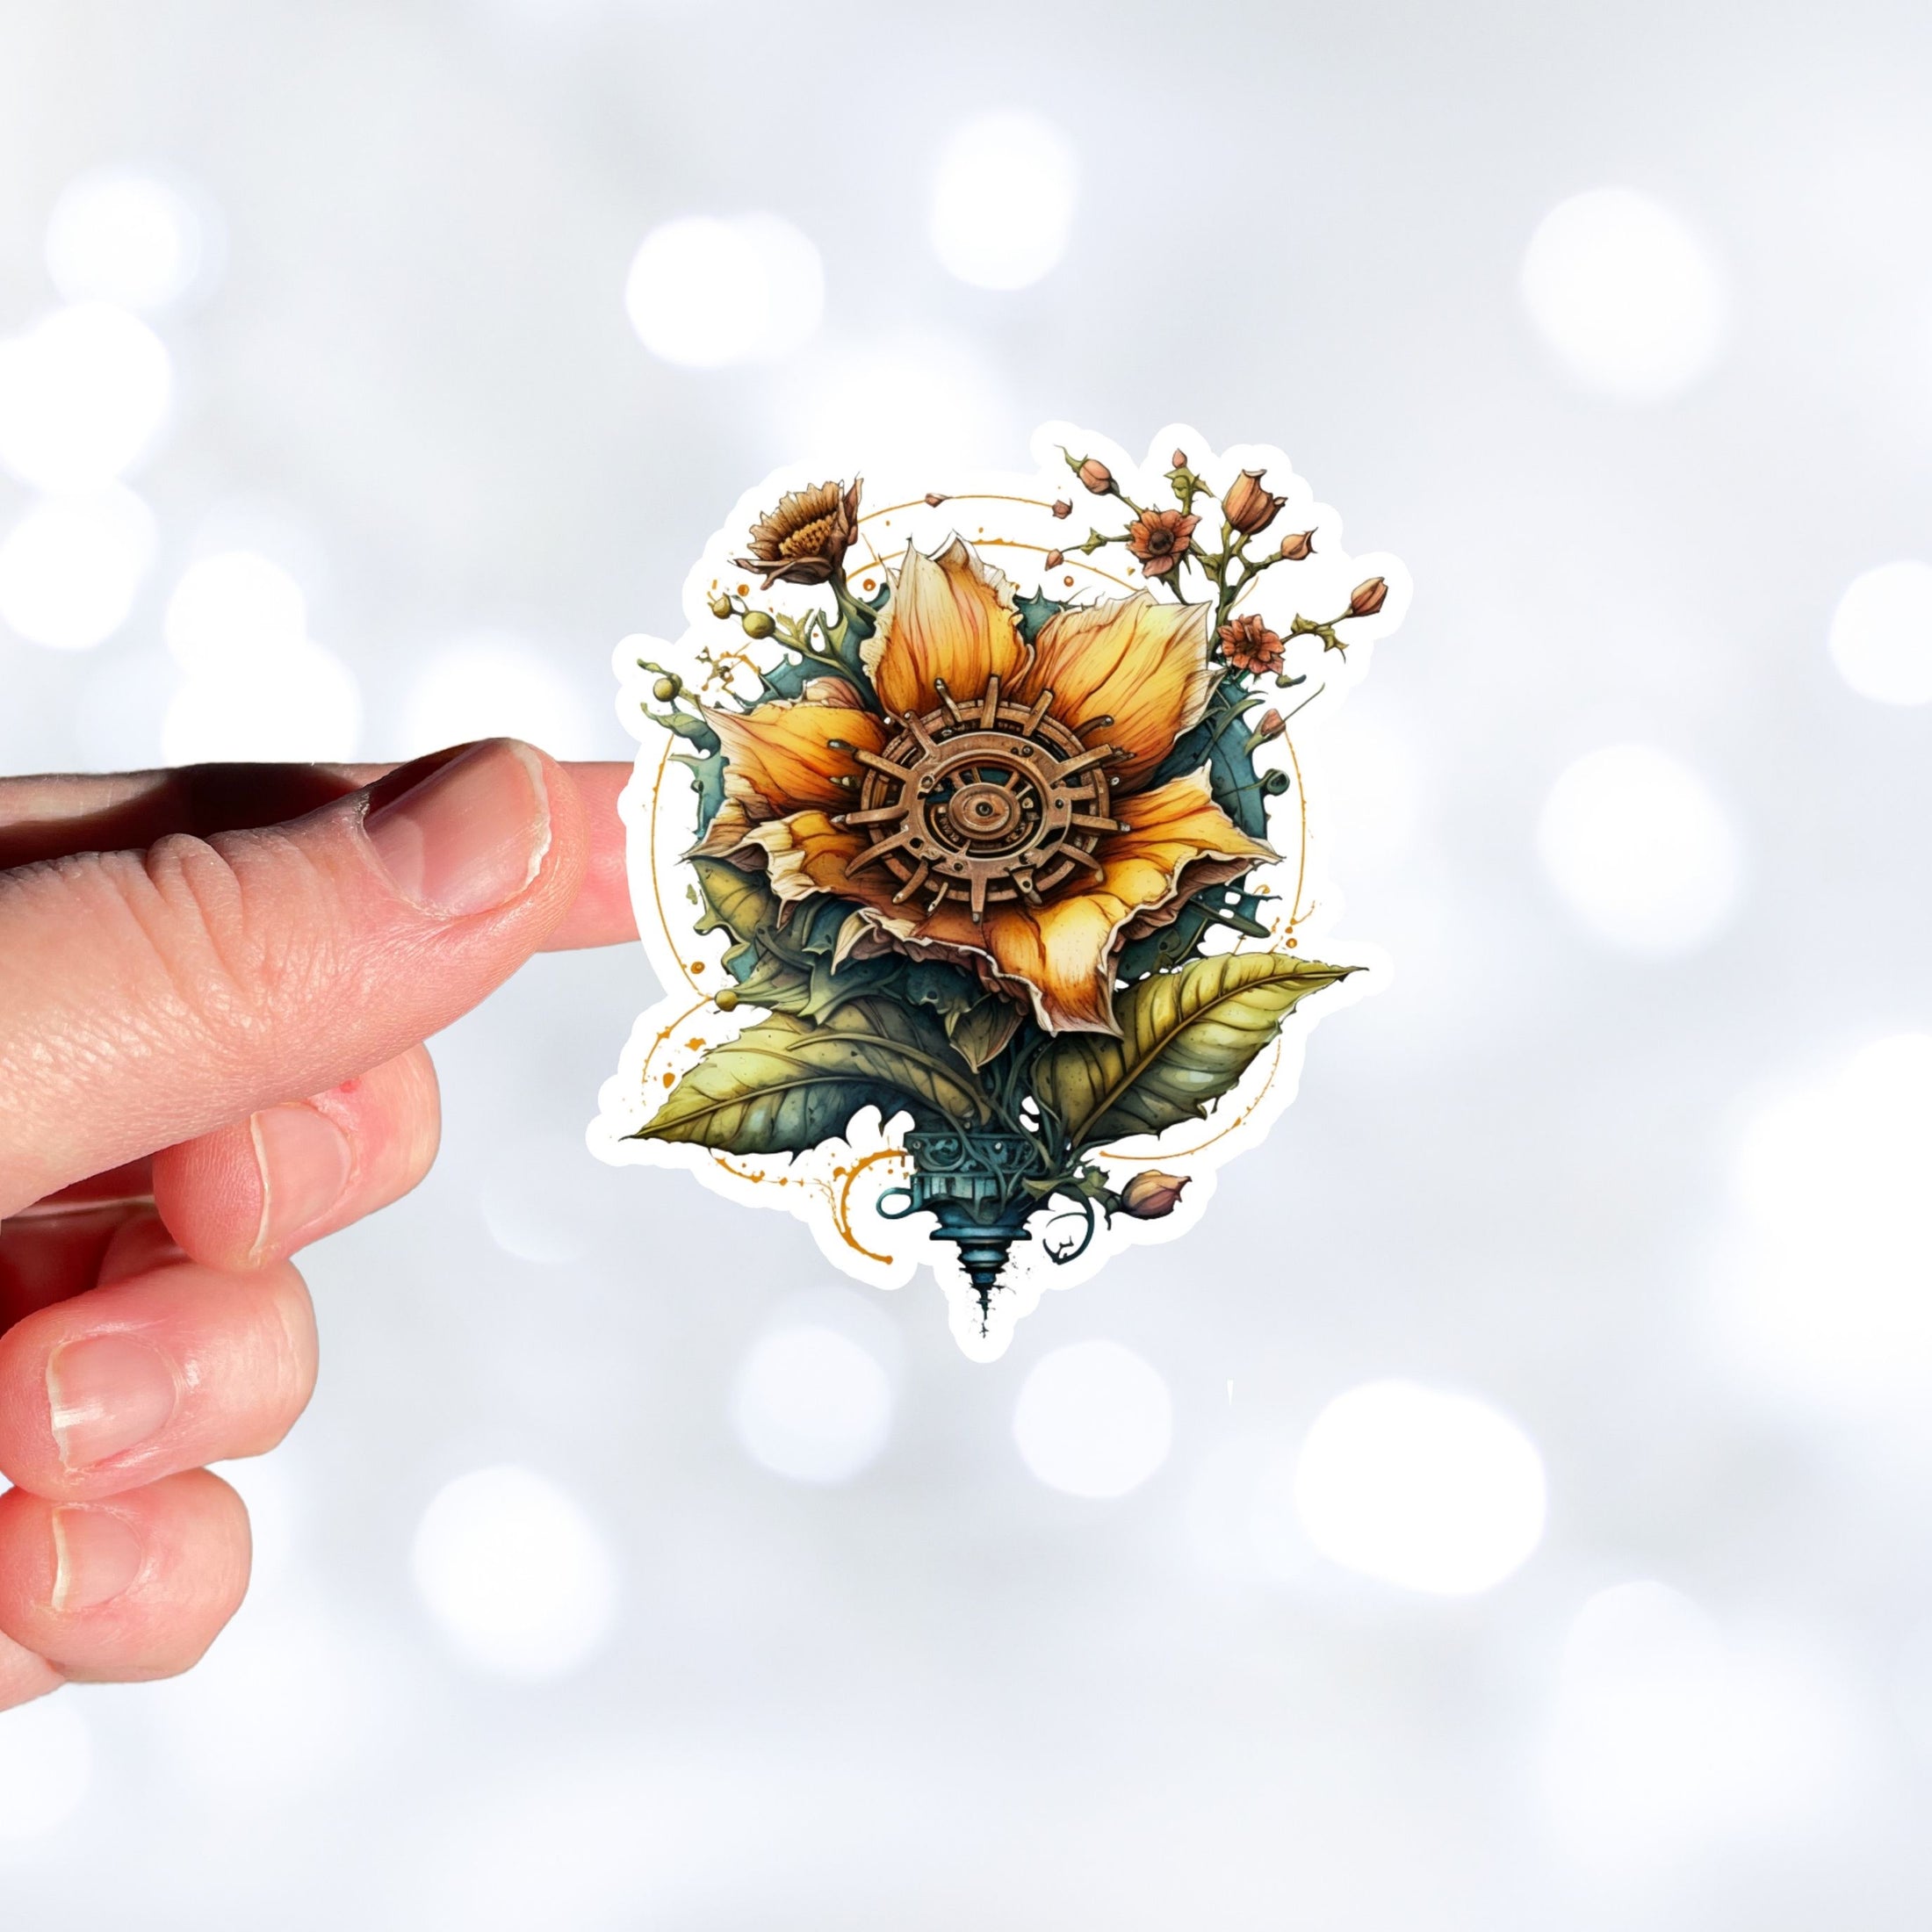 This image shows a hand holding the steampunk sunflower sticker.